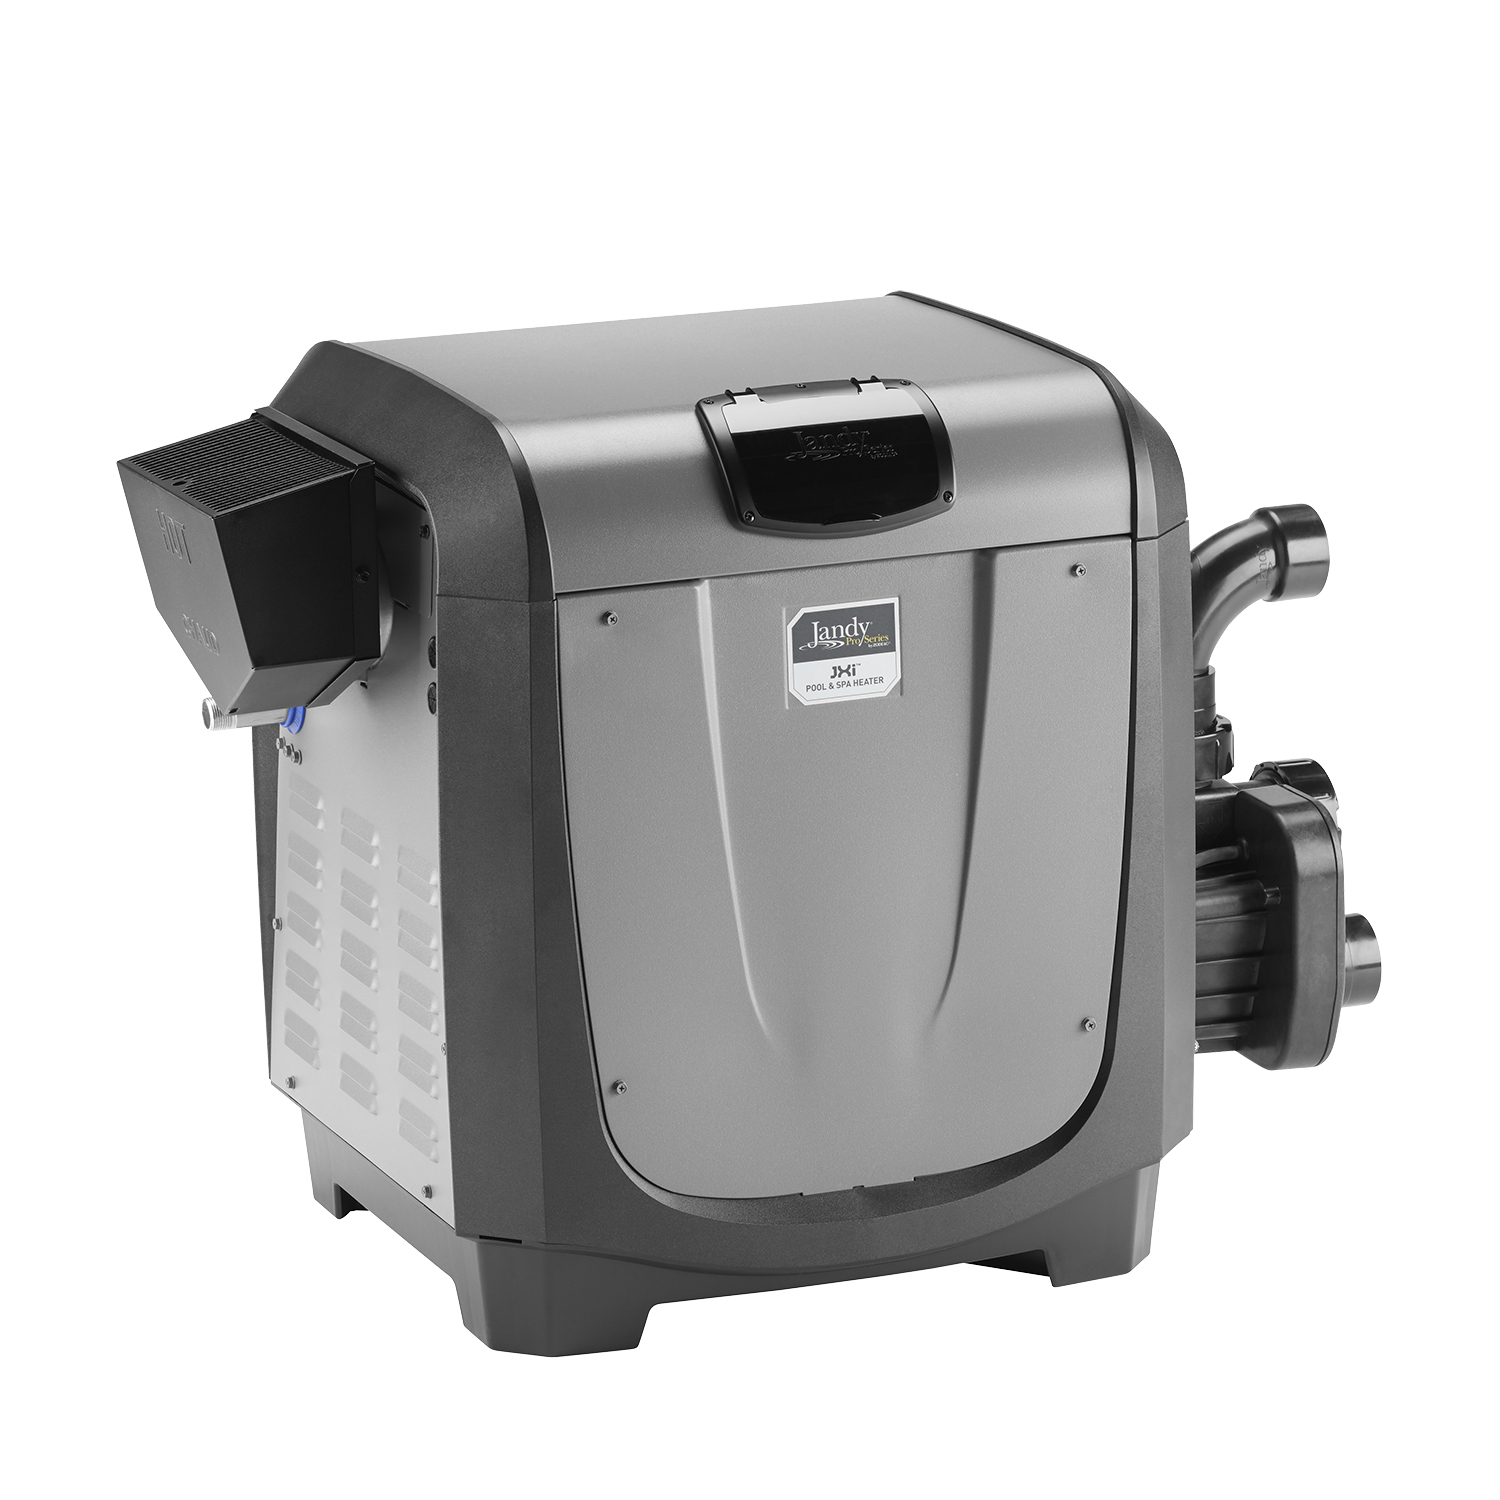 jxi-non-asme-pool-and-spa-heater-jandy